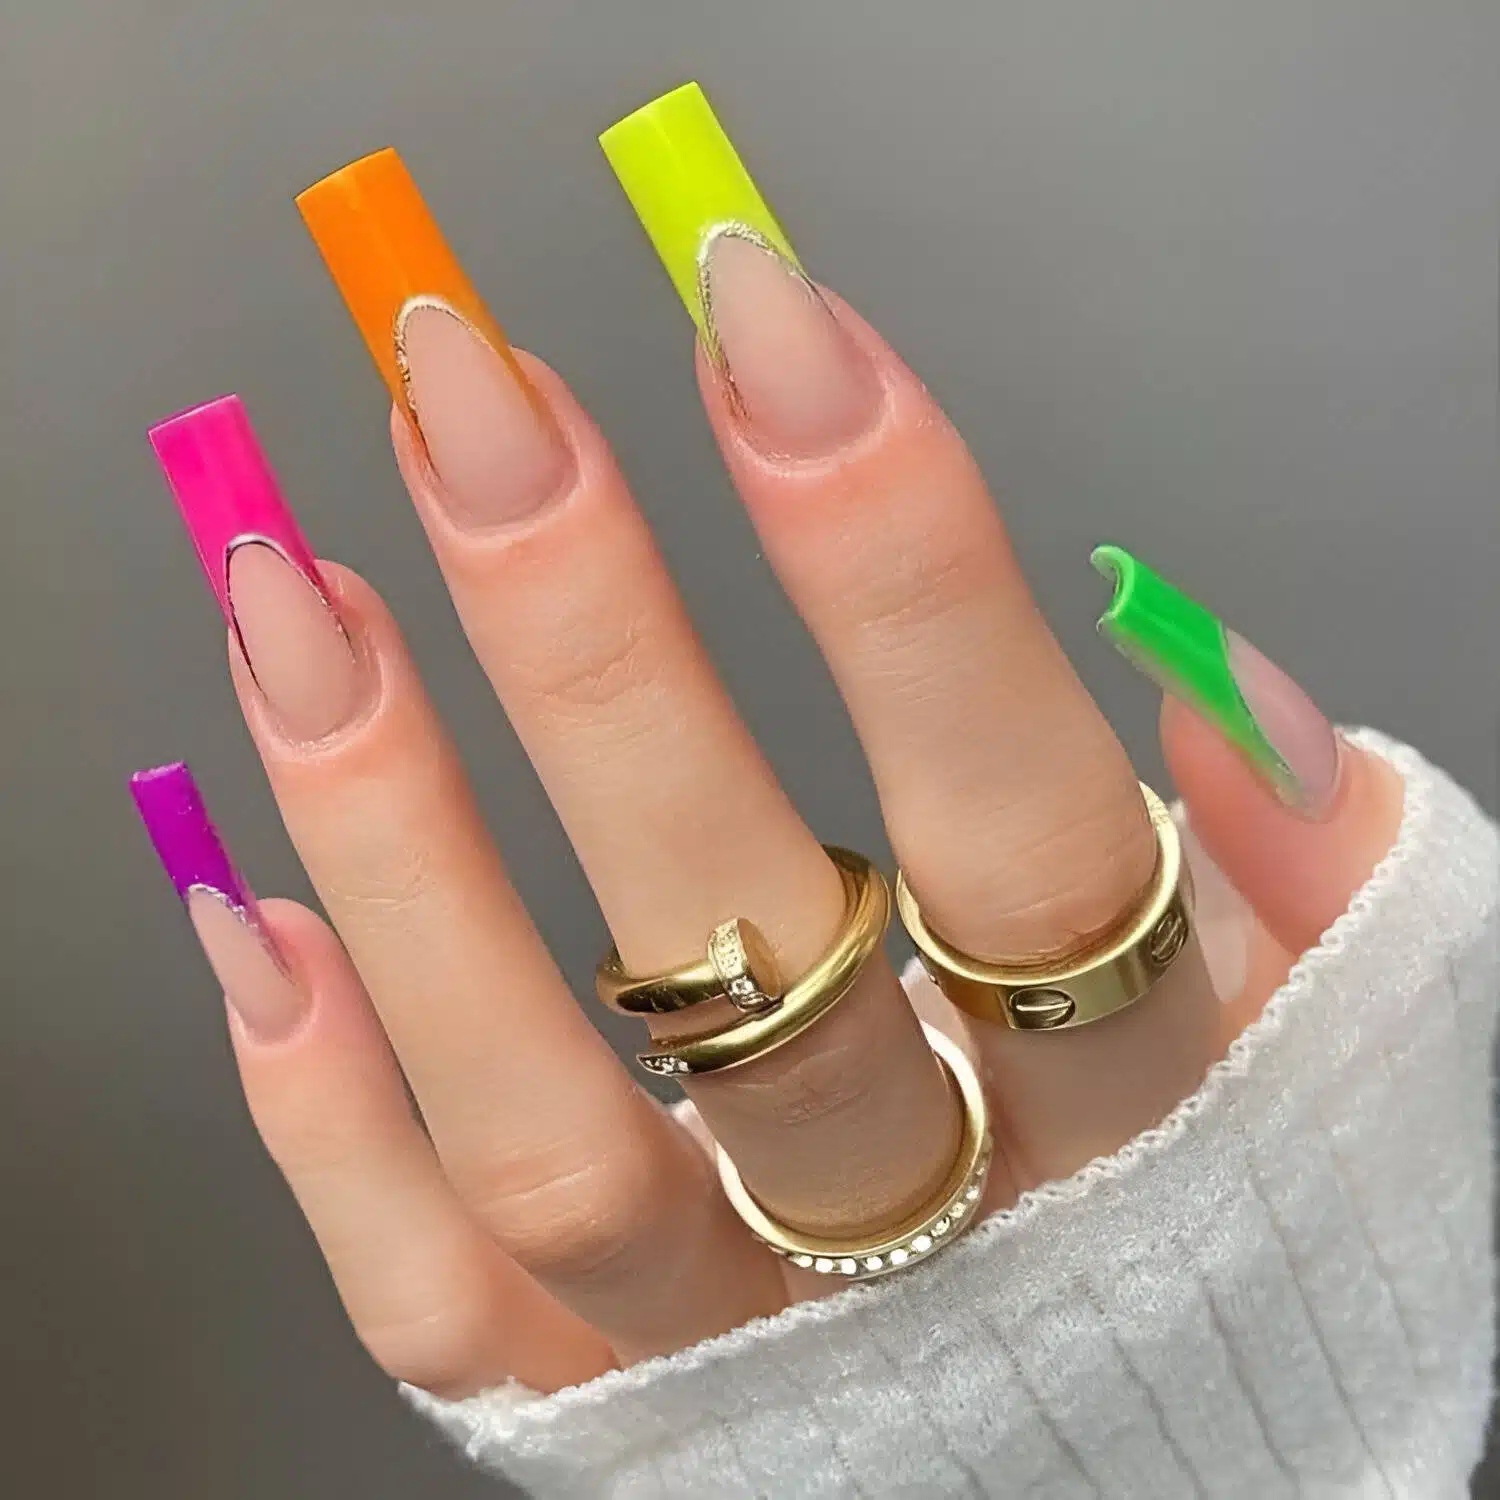 30 Colorful Nail Art Designs To Have Fun And Stay Fabulous - 217